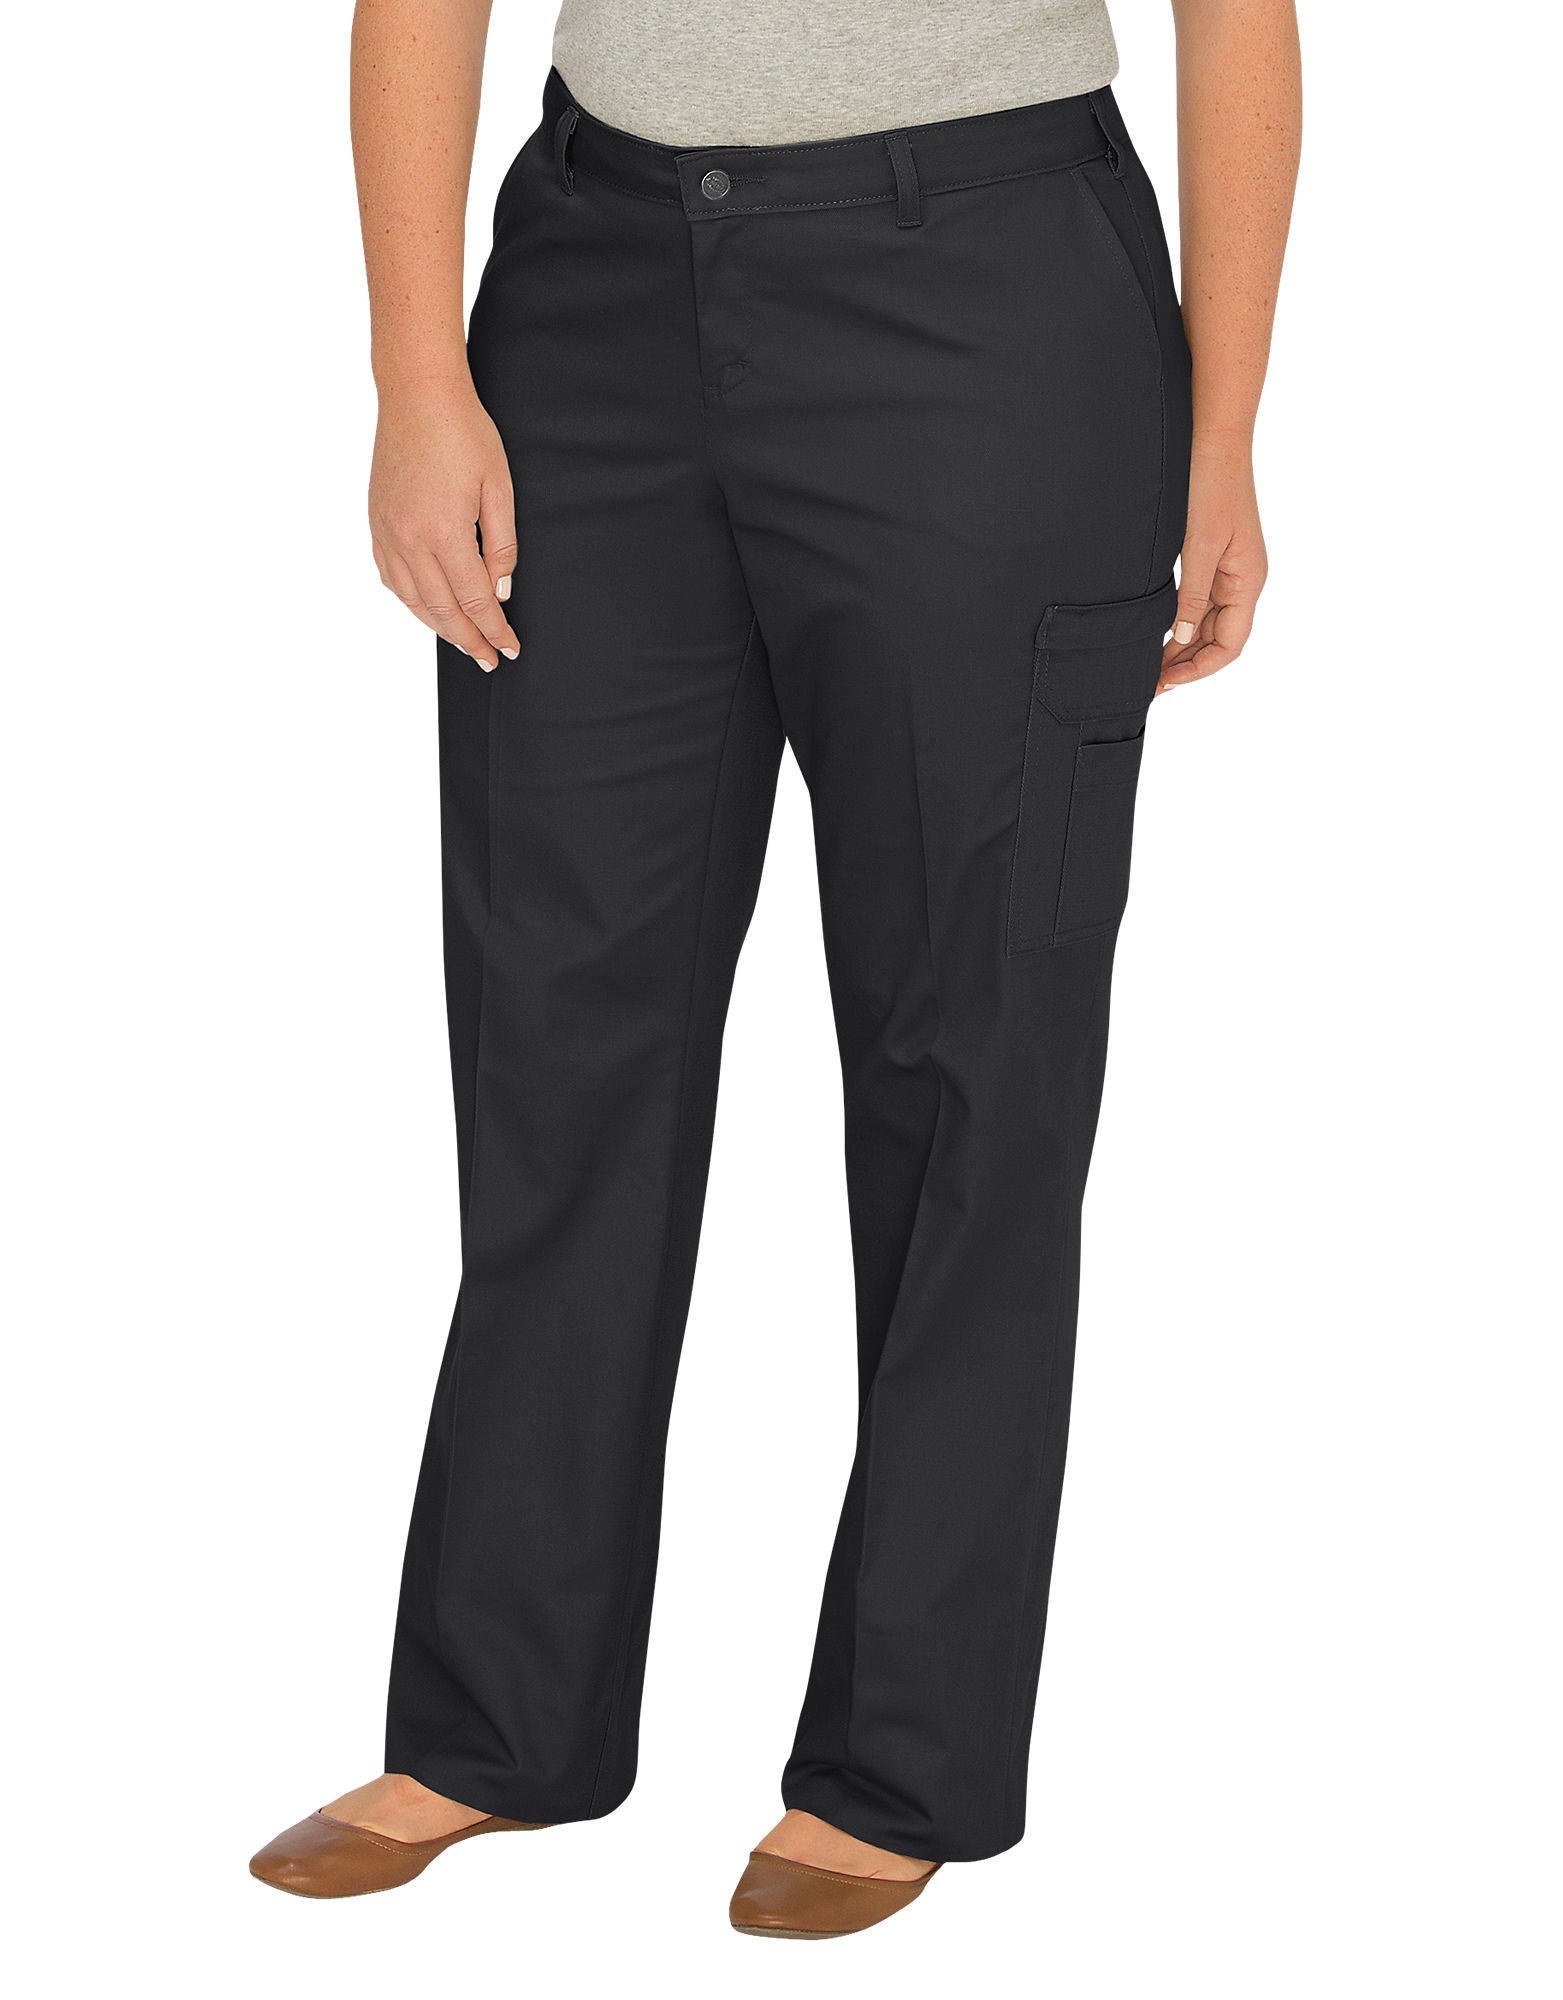 DIC-FPW337 - Dickies Womens Plus Size Relaxed Fit Straight Leg Cargo Pants